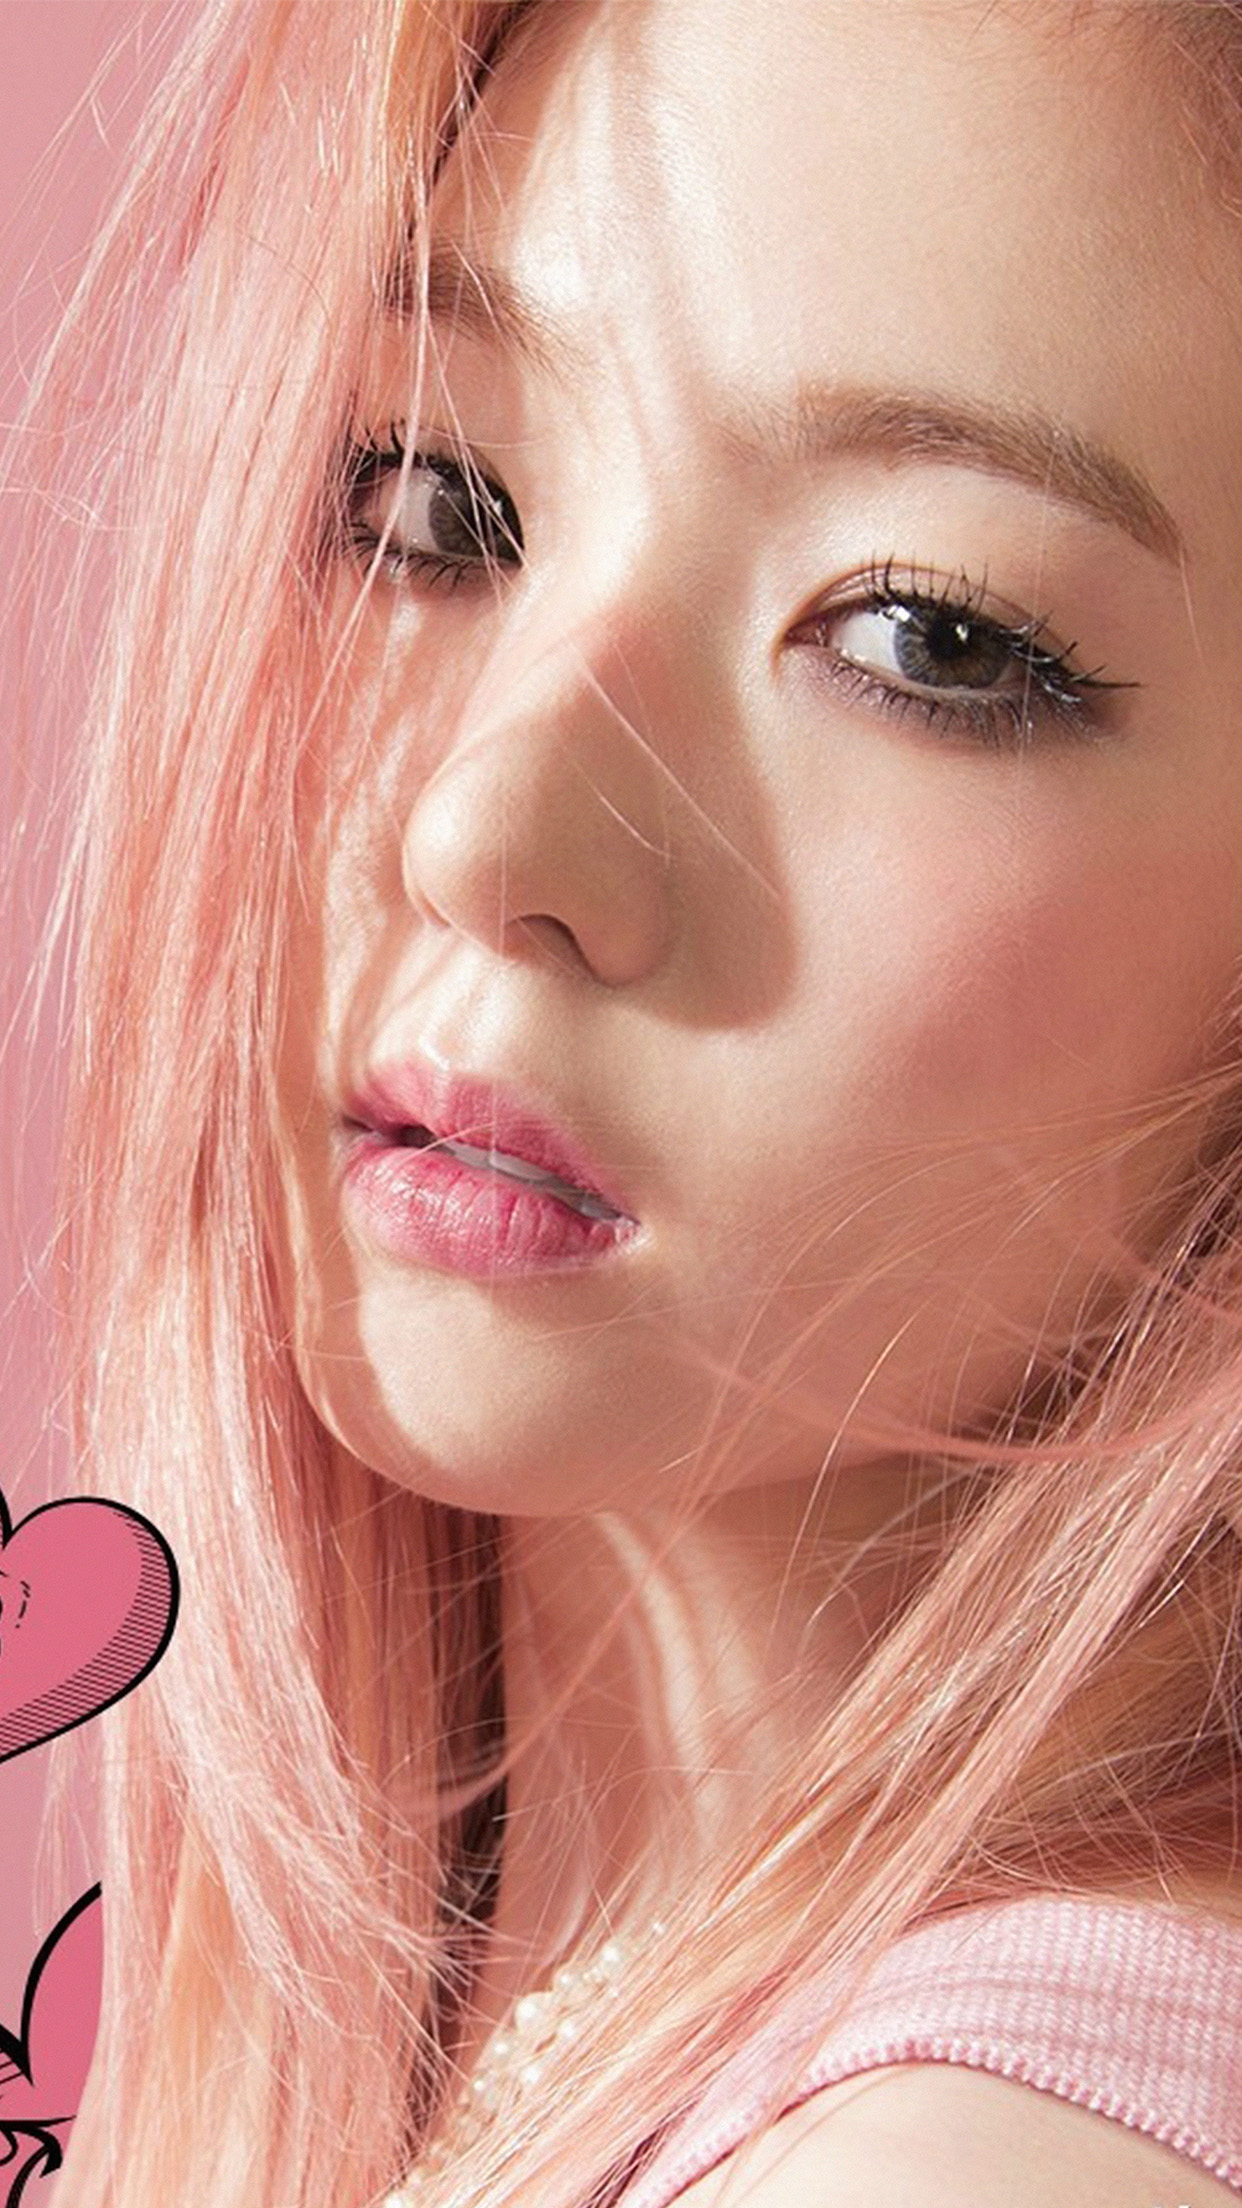 Kpop Irene Face Cute Pink Asian Android wallpaper